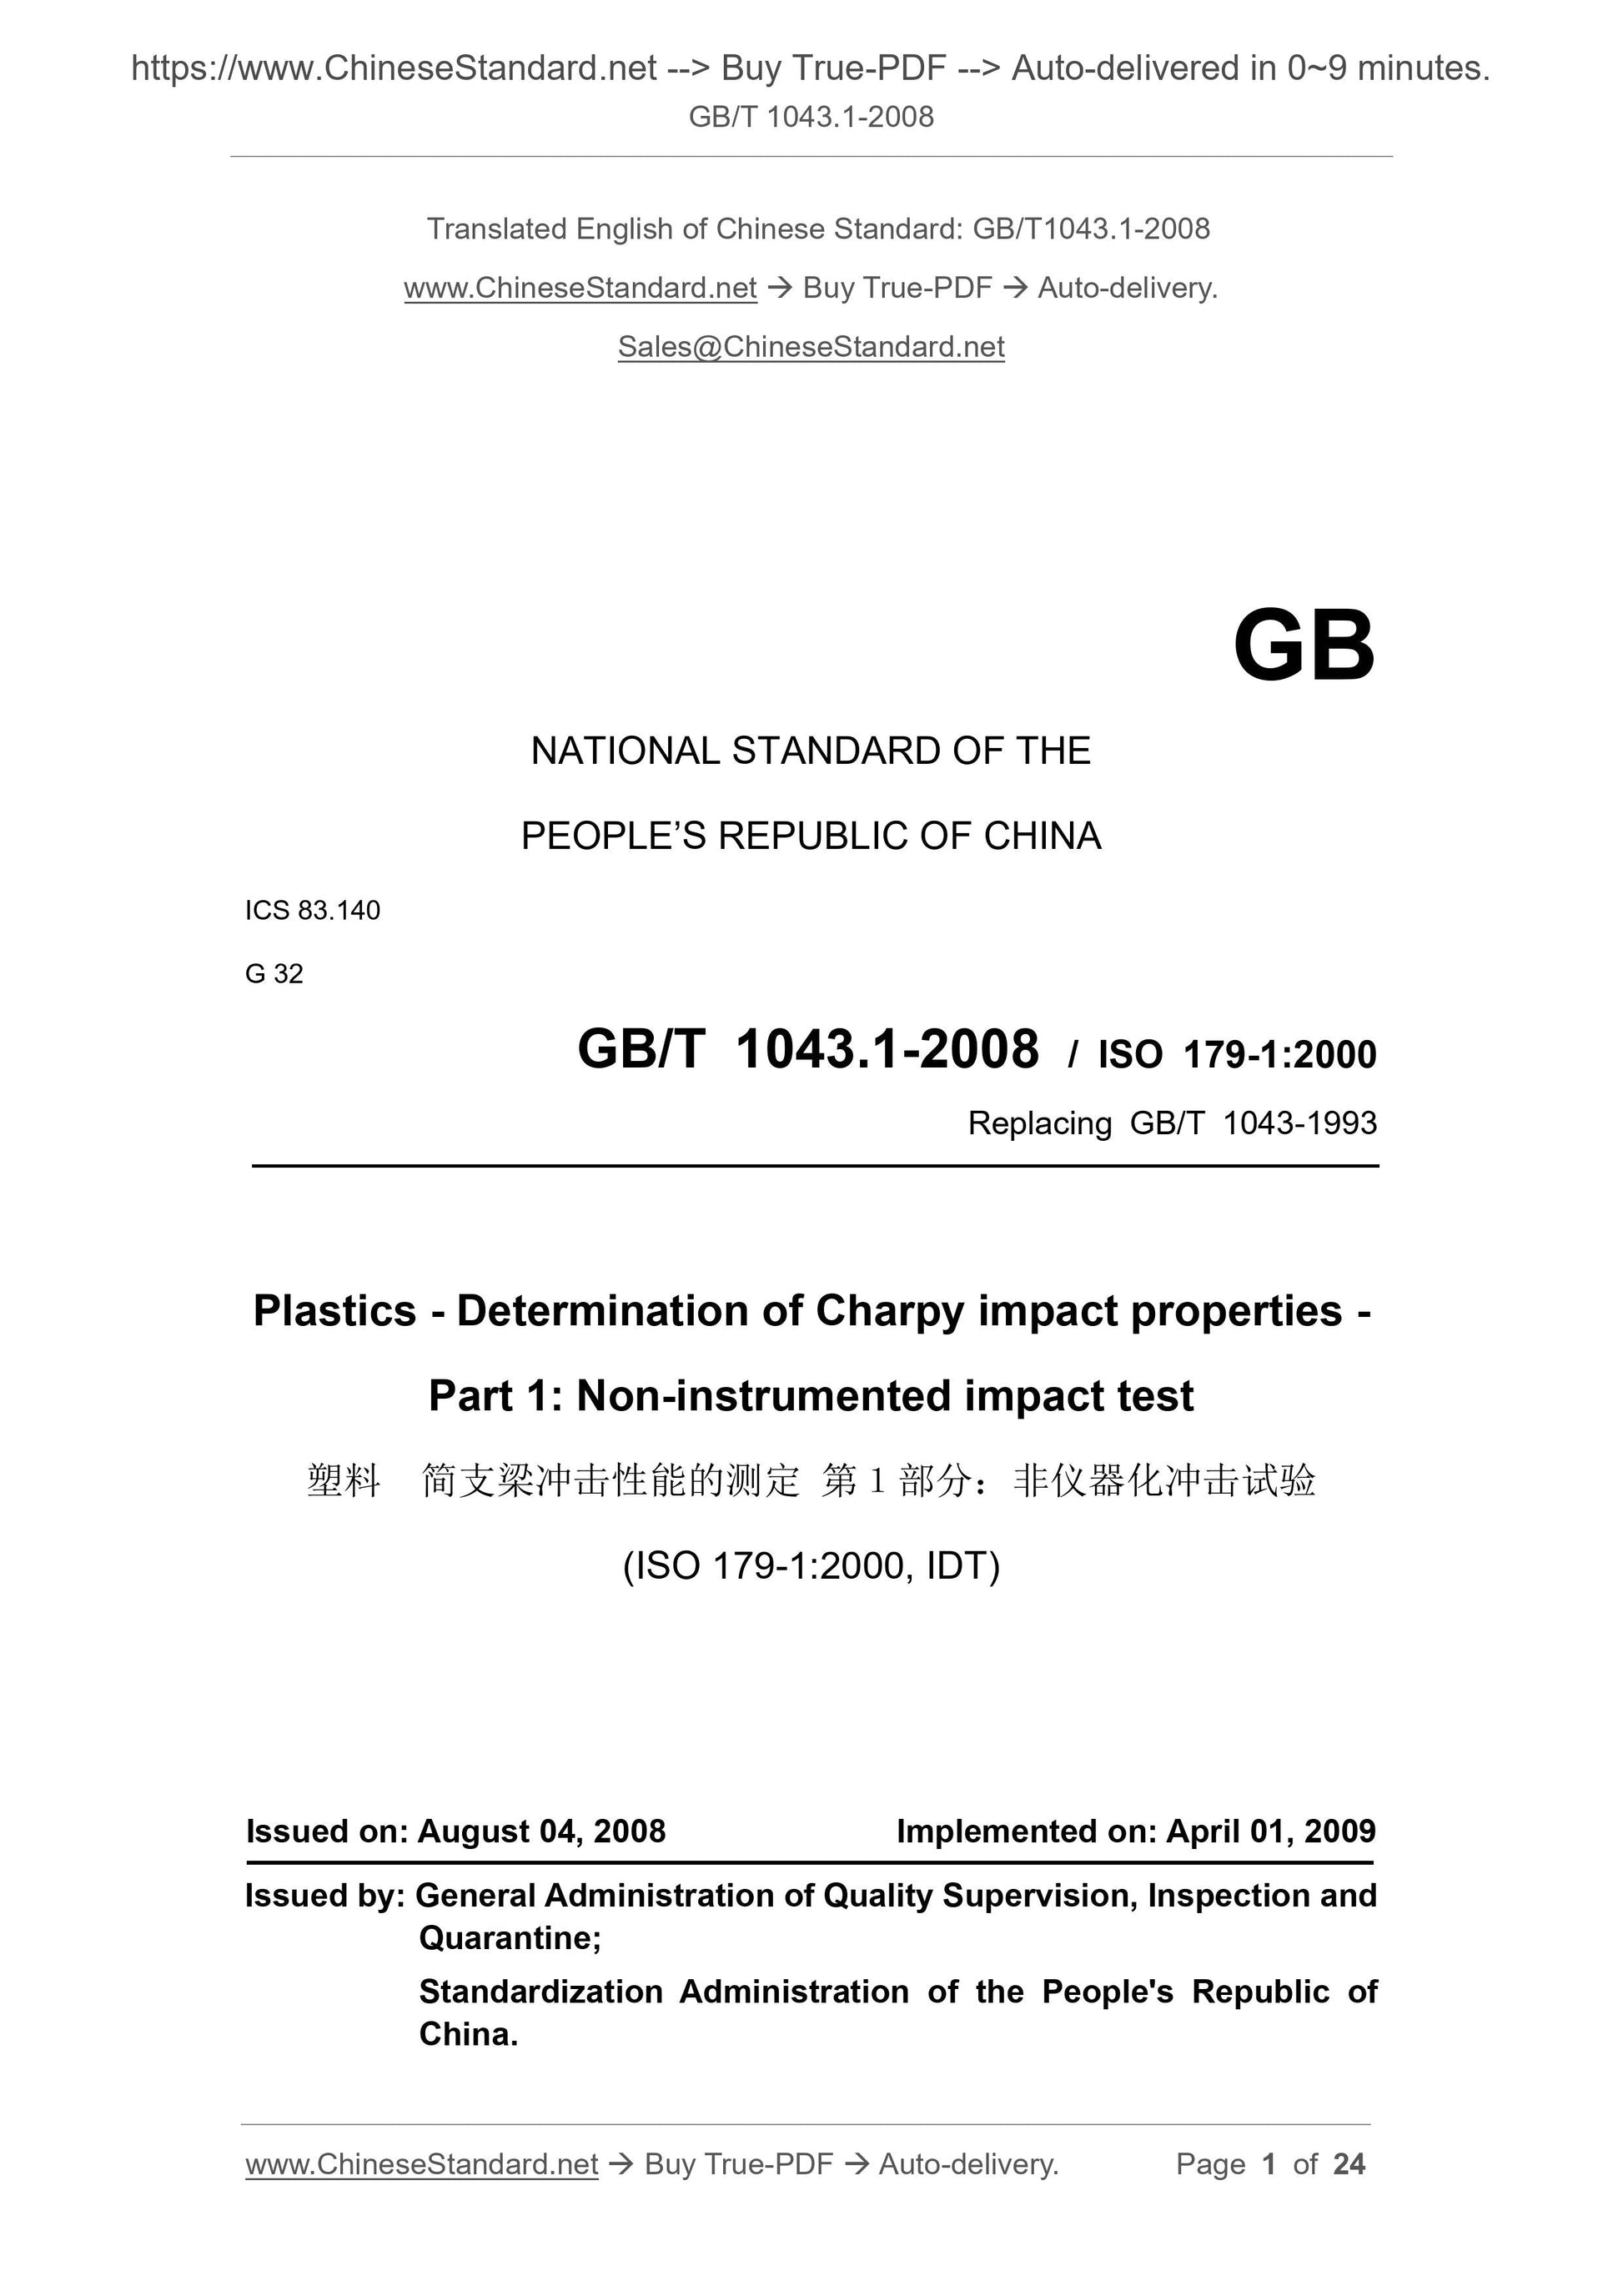 GB/T 1043.1-2008 Page 1